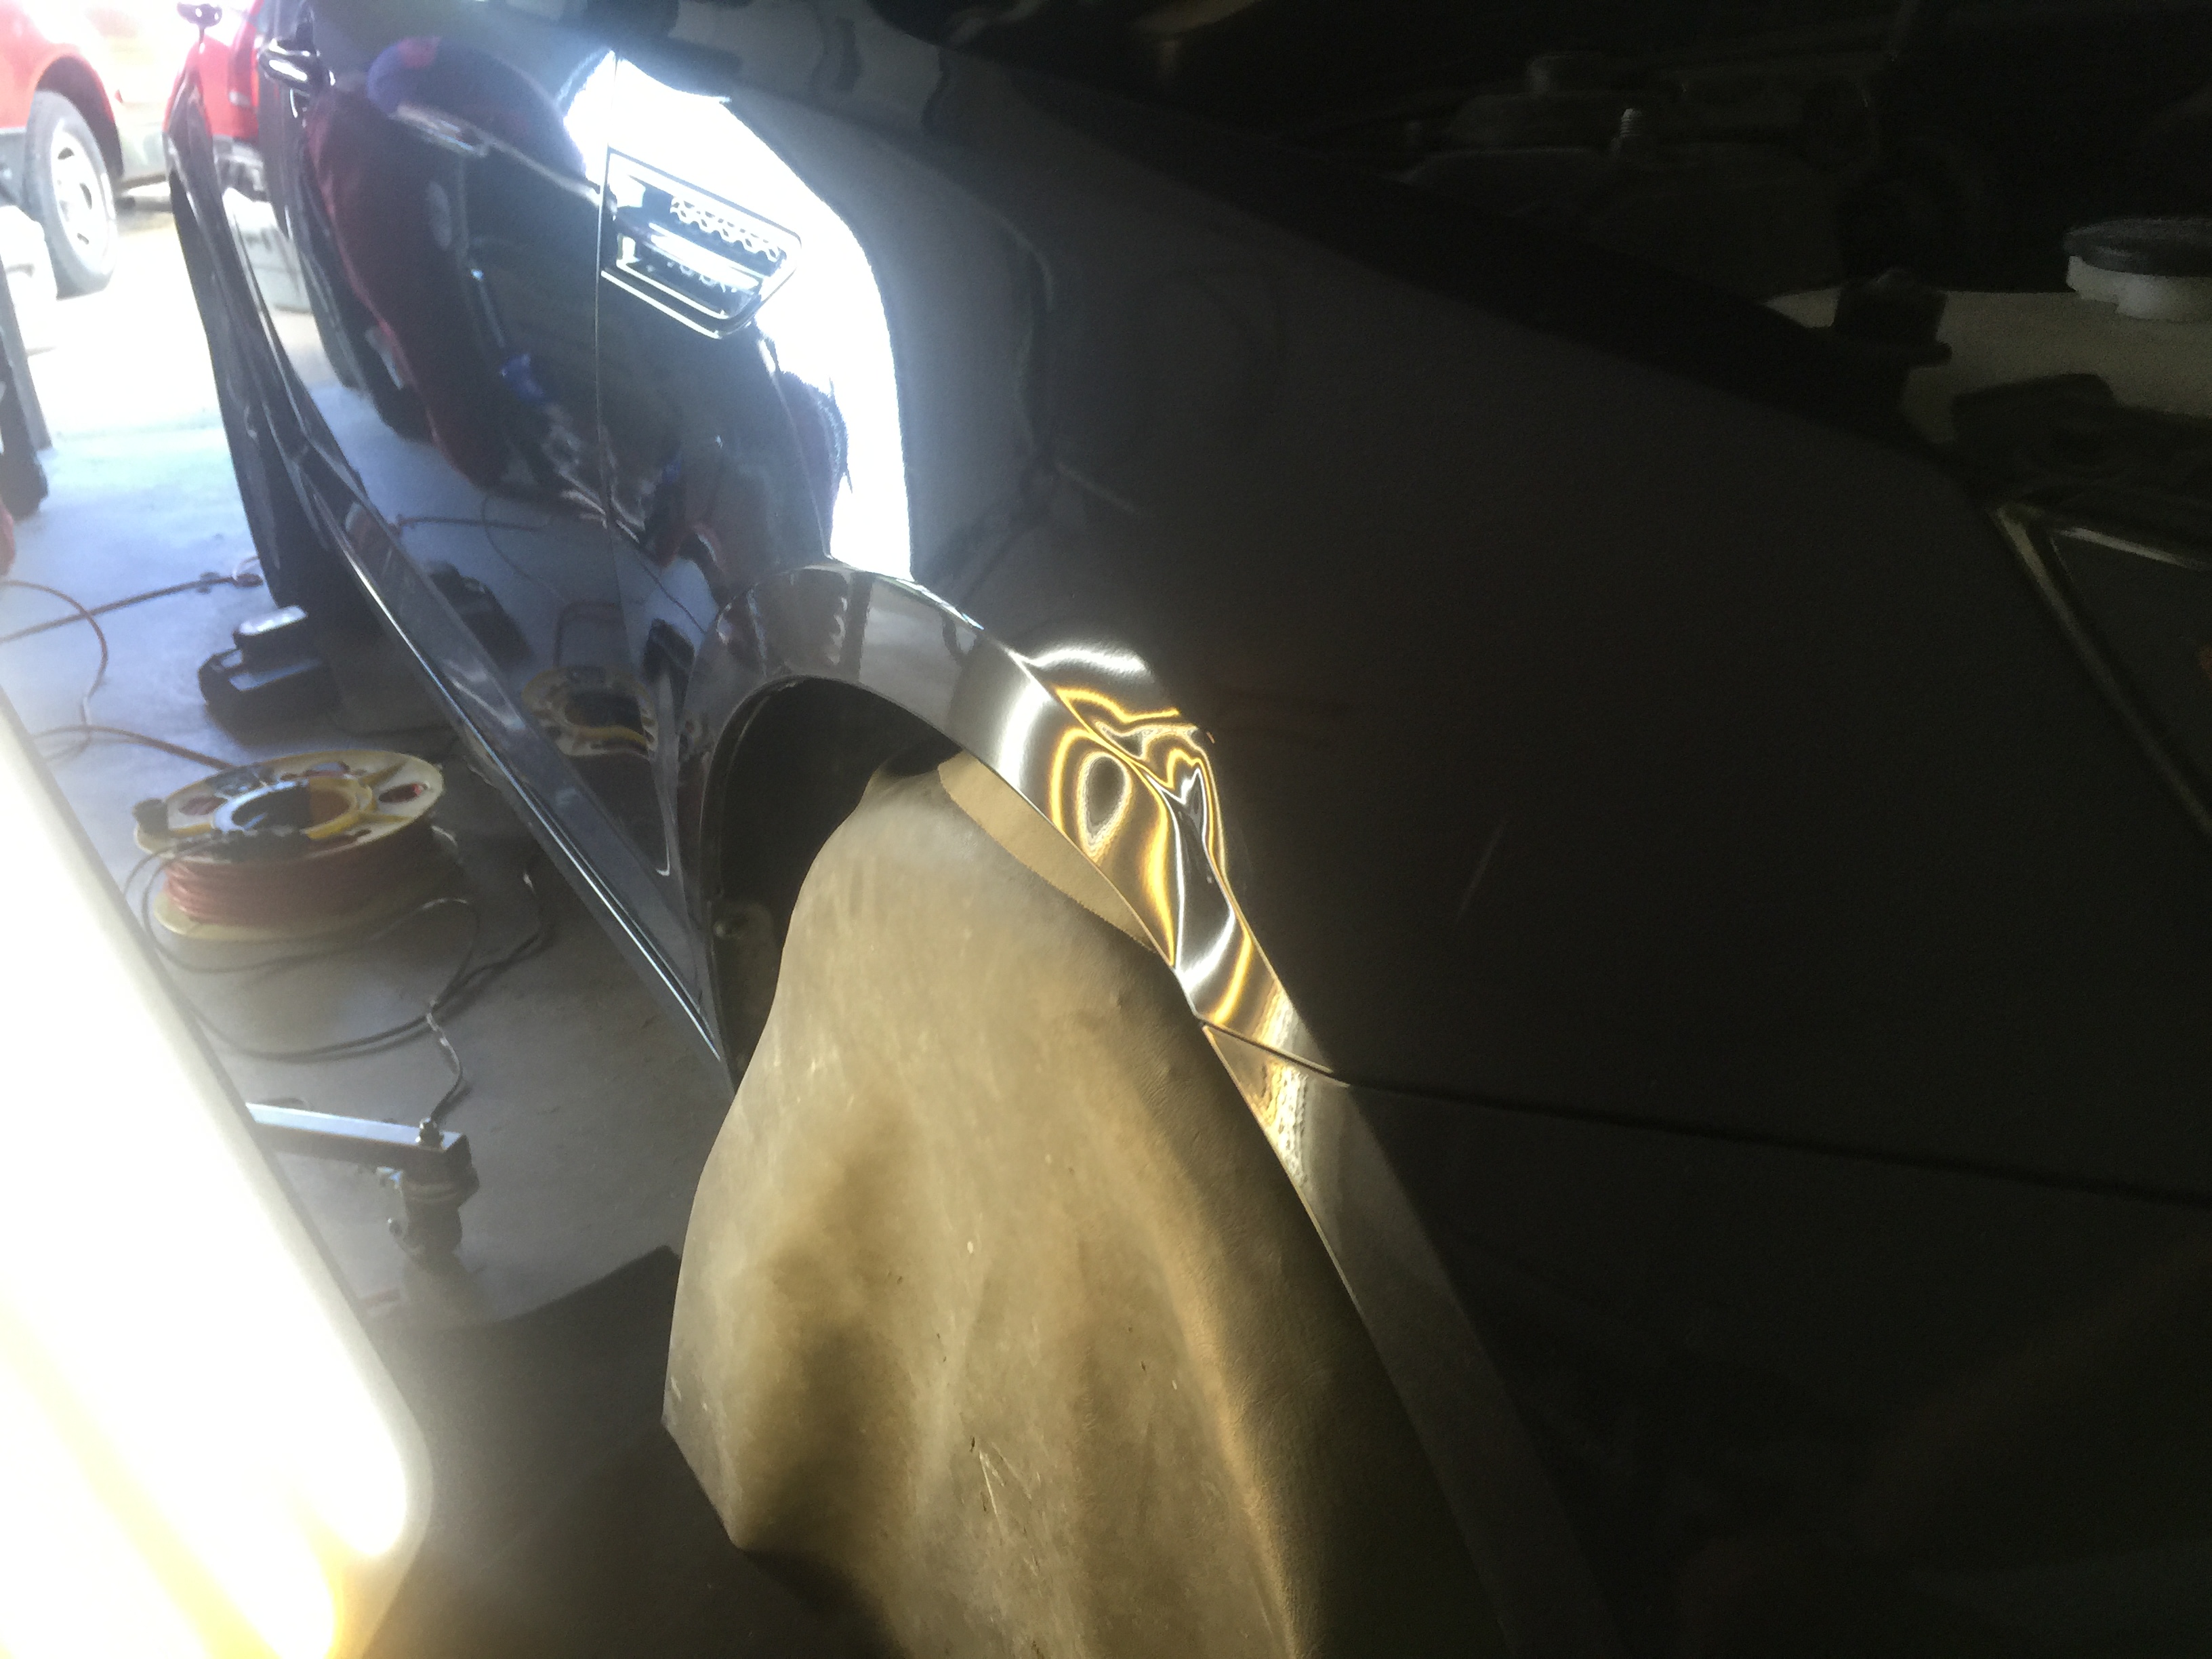 2011 Kia Optima Fender dent repair, with paintless dent removal process, large dent repair, in Springfield, IL. http://217dent.com